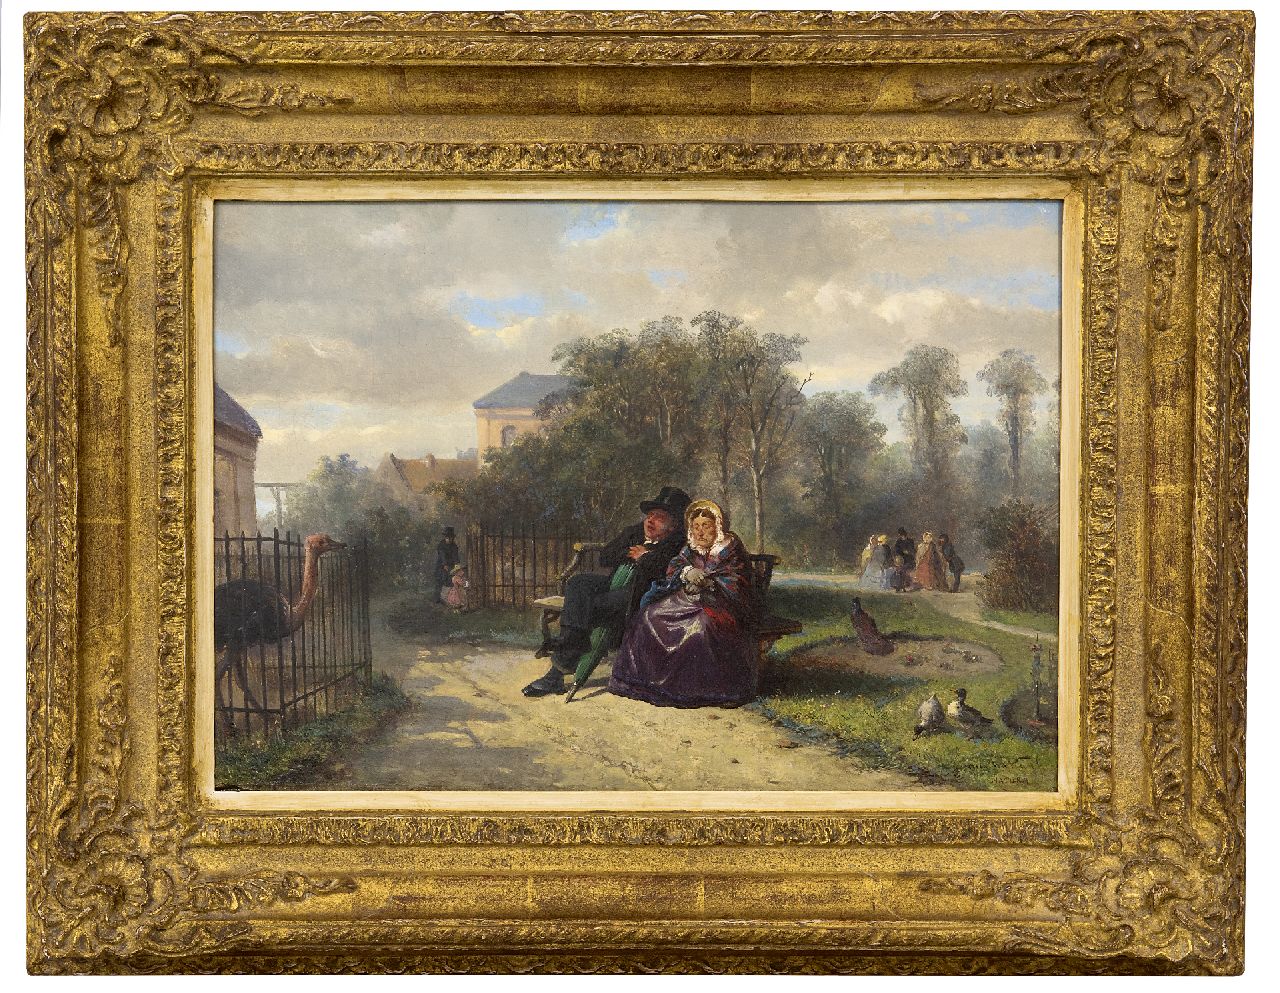 Kate J.M.H. ten | Johan 'Mari' Henri ten Kate, Visiting Artis Zoo in Amsterdam, oil on panel 26.9 x 38.3 cm, signed l.r. and dated 1860 on a label on the reverse